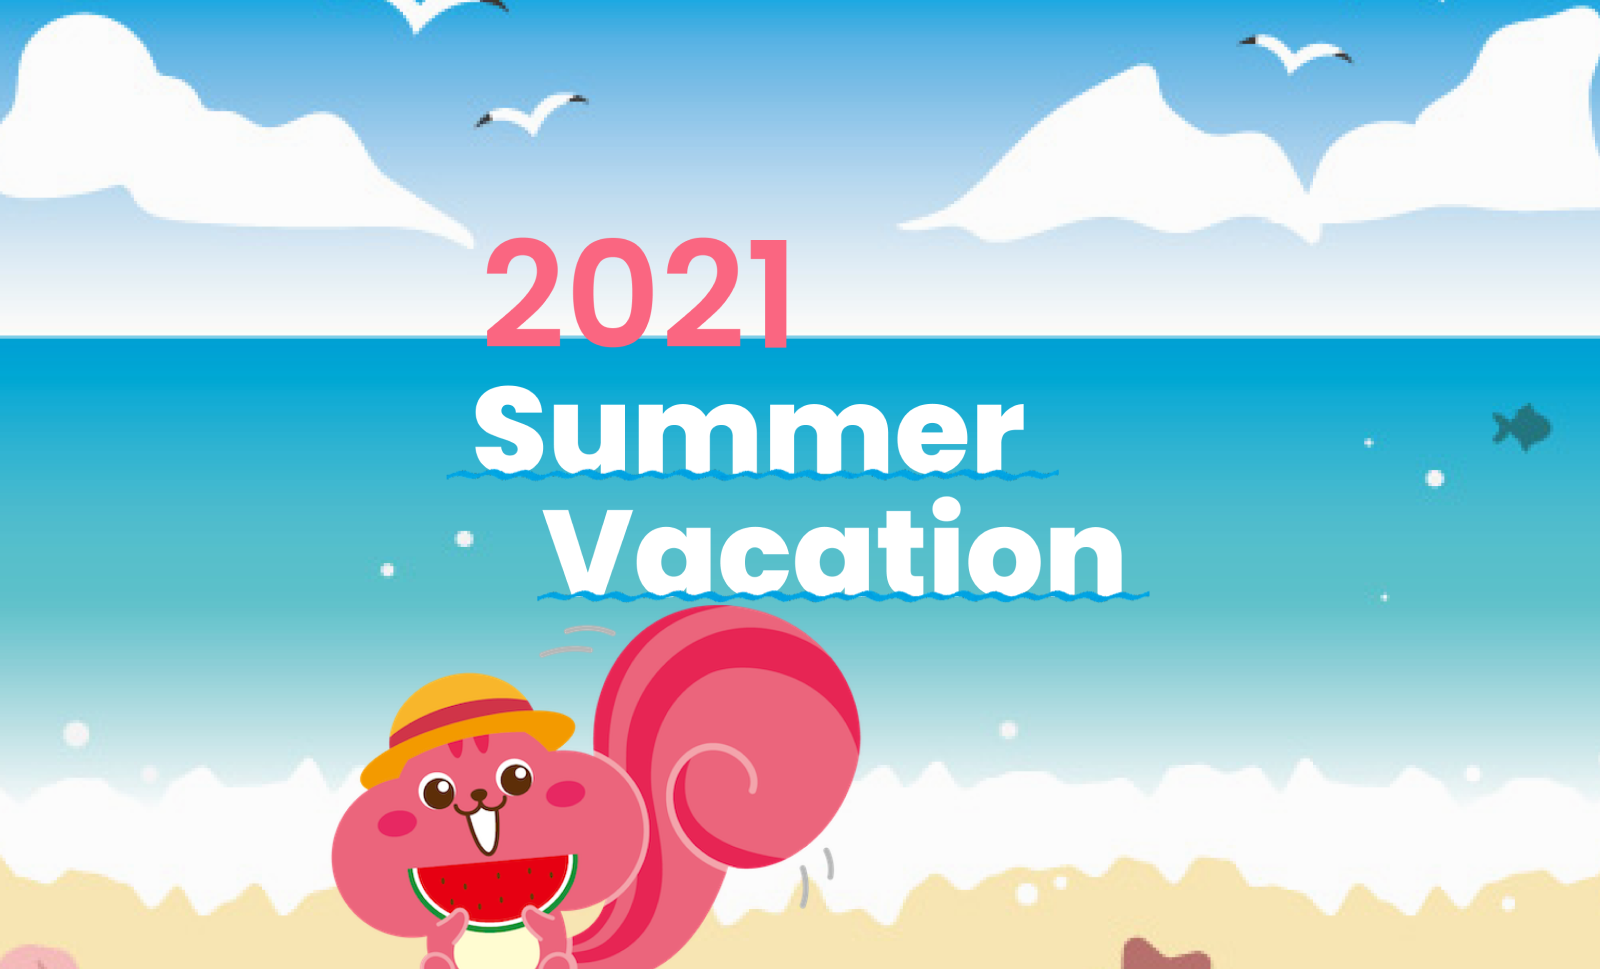 https://images.microcms-assets.io/assets/e4b3ffa99d9d4e8a9a1dffde0df830c3/55e56db9ba3e487b832df538f2c5b2ad/summer-vacation-2021-thumbnail.png.png